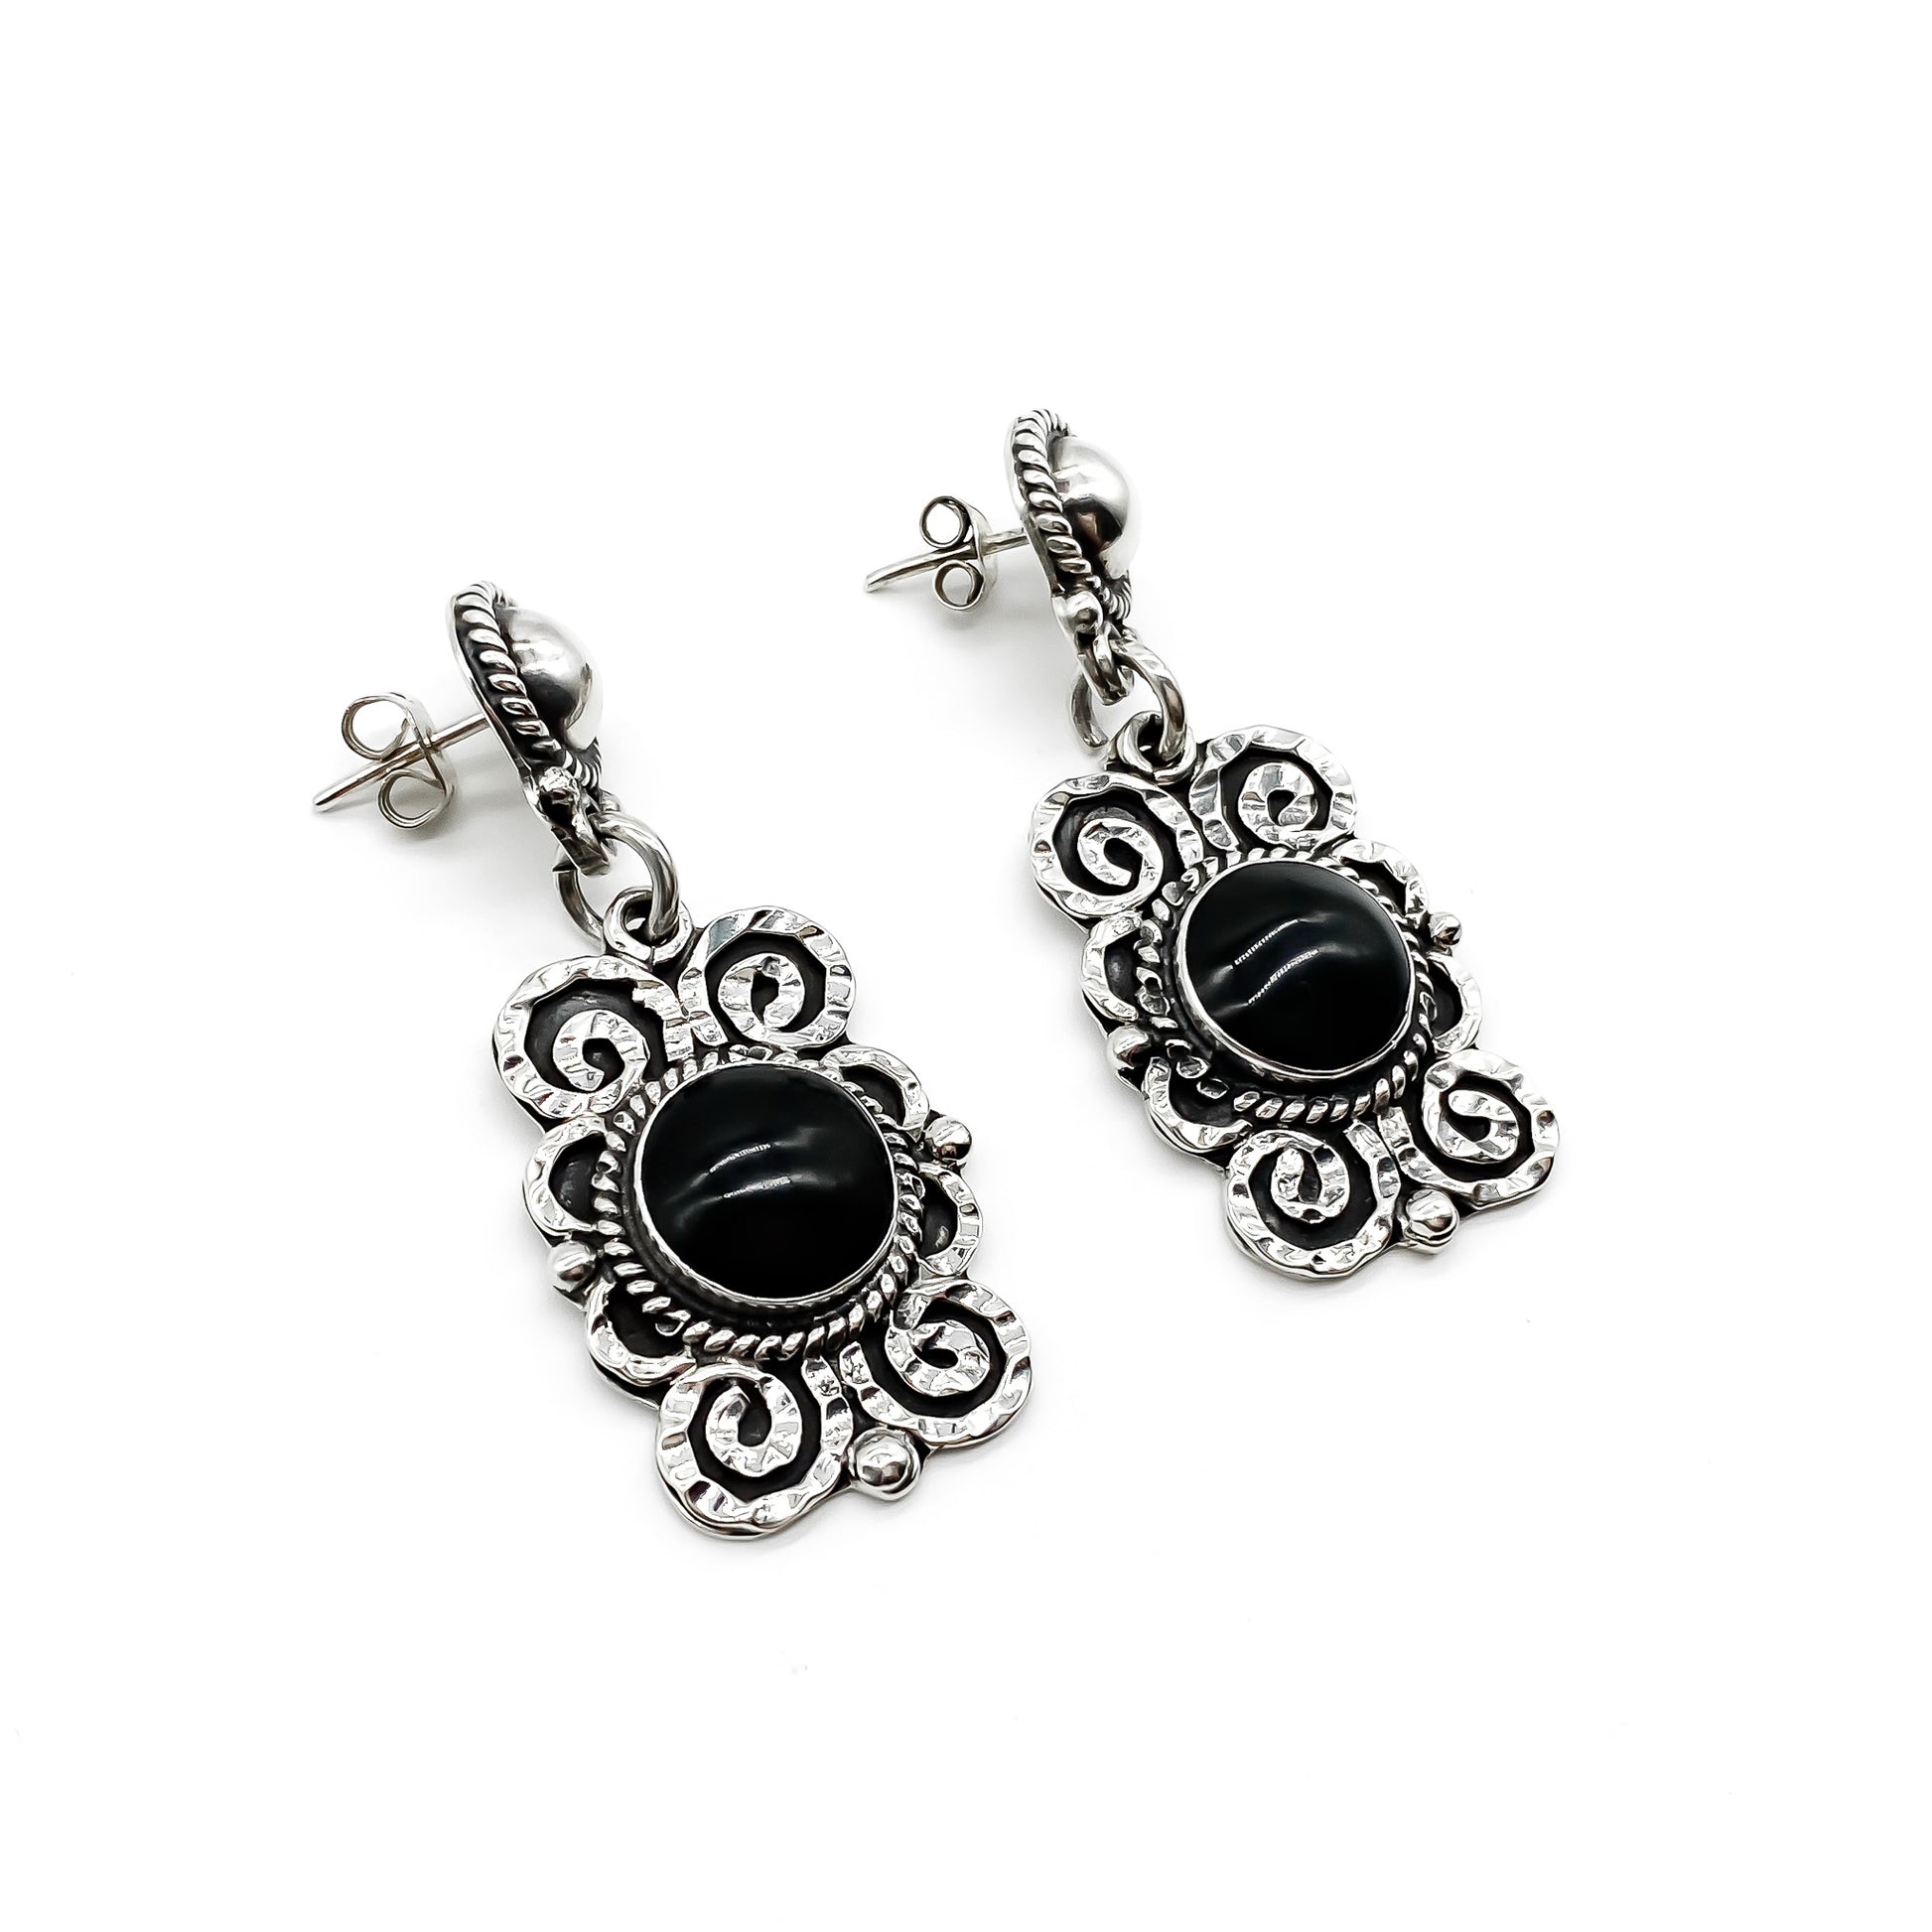 Lovely vintage sterling silver Mexican drop earrings, each set with a round onyx cabochon.